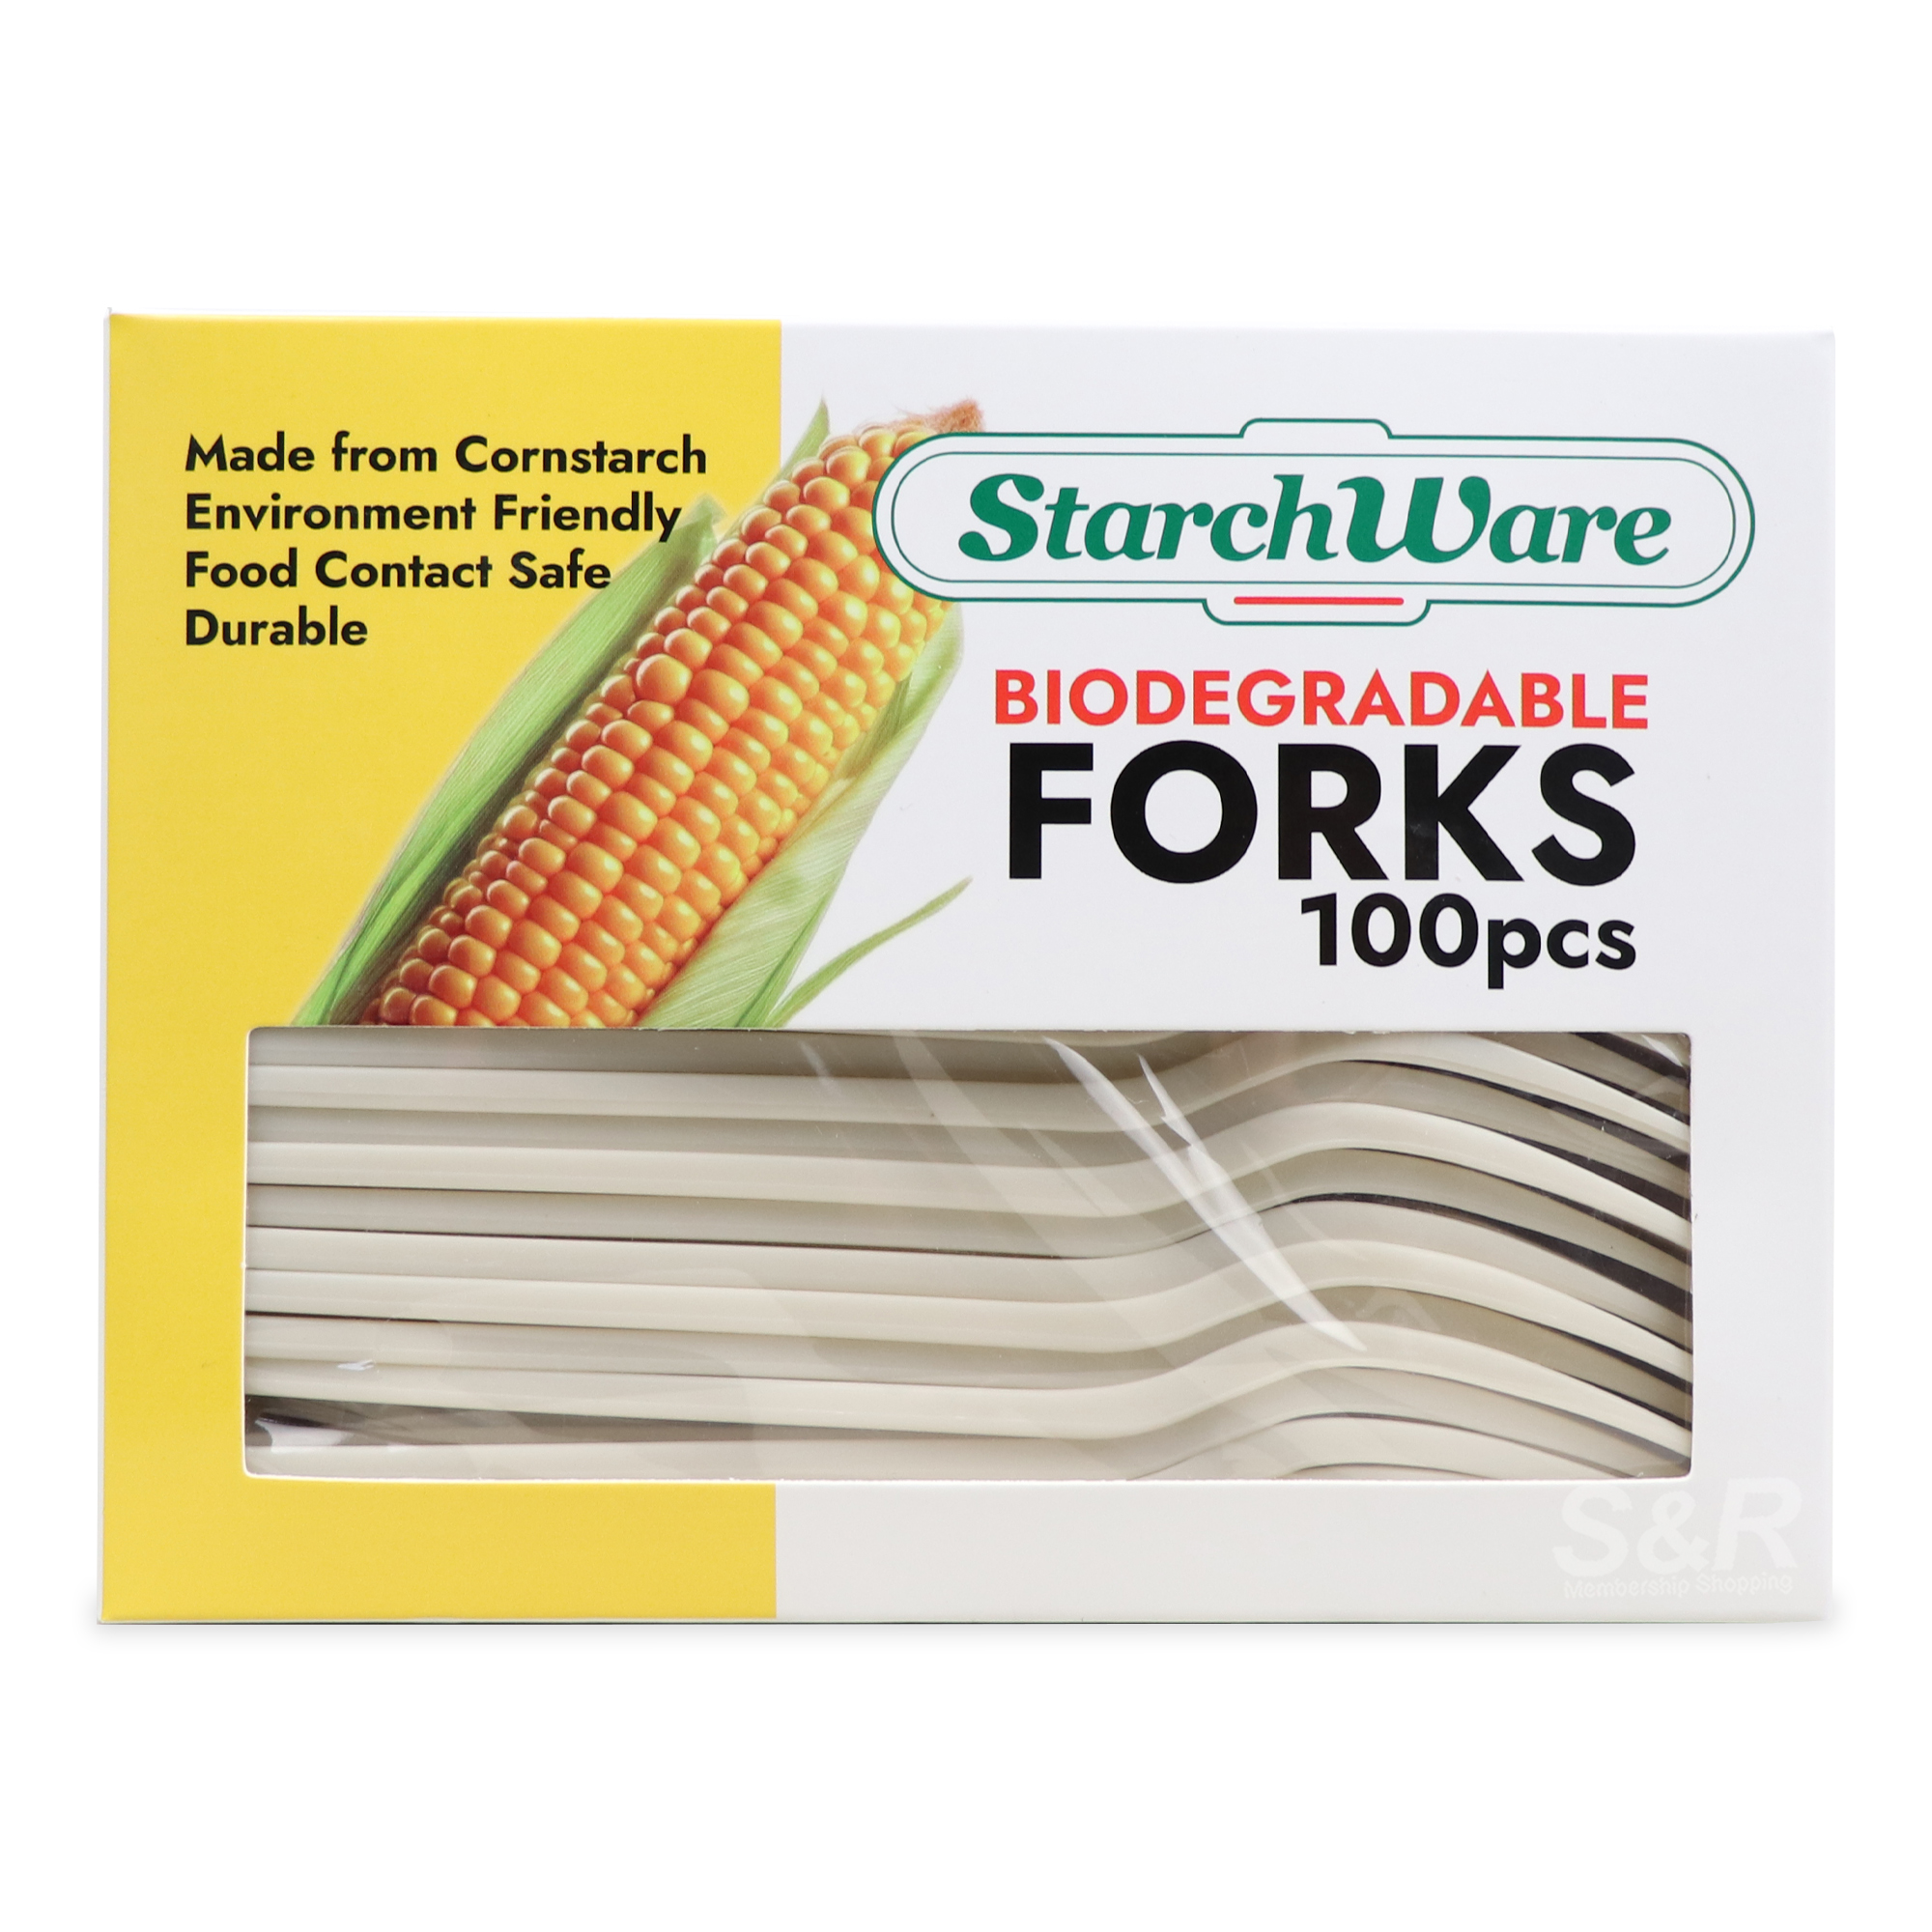 Starch Ware Biodegradable Forks 100pcs